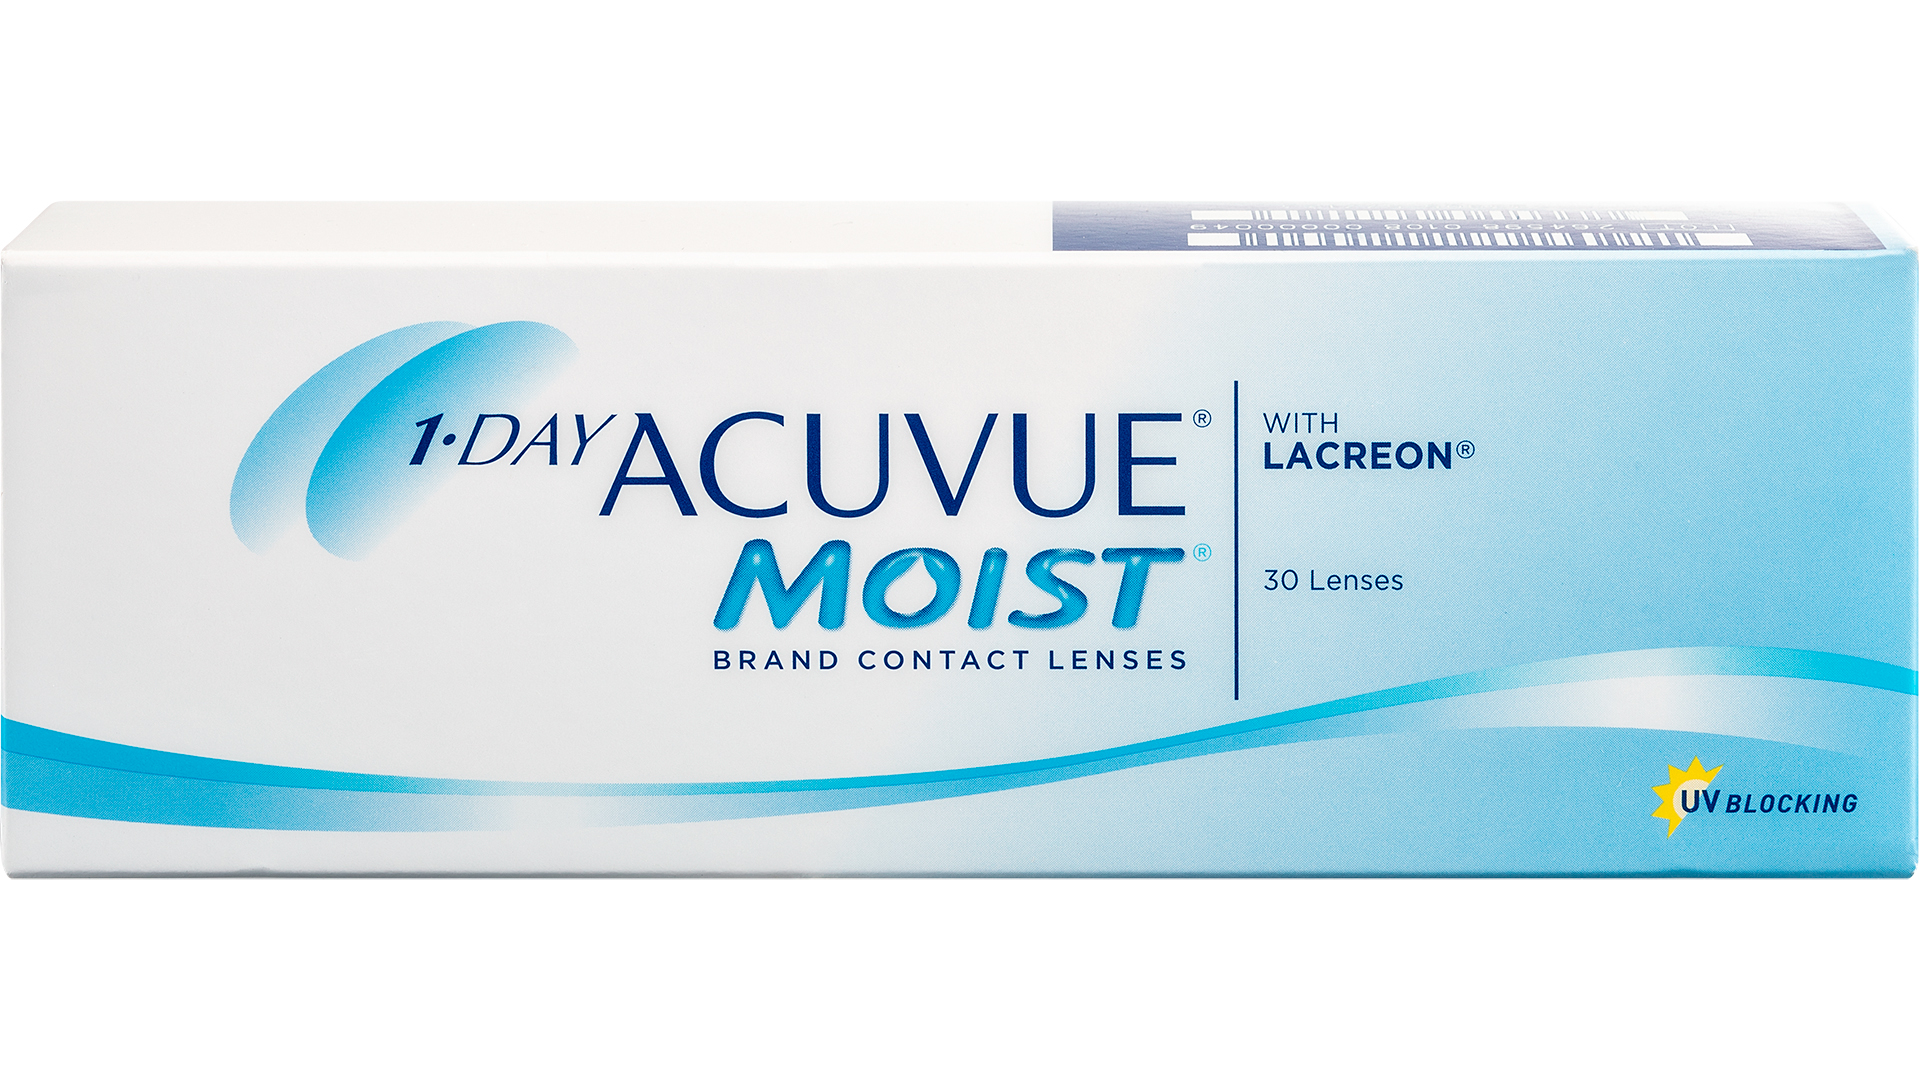 Front 1-Day Acuvue Moist